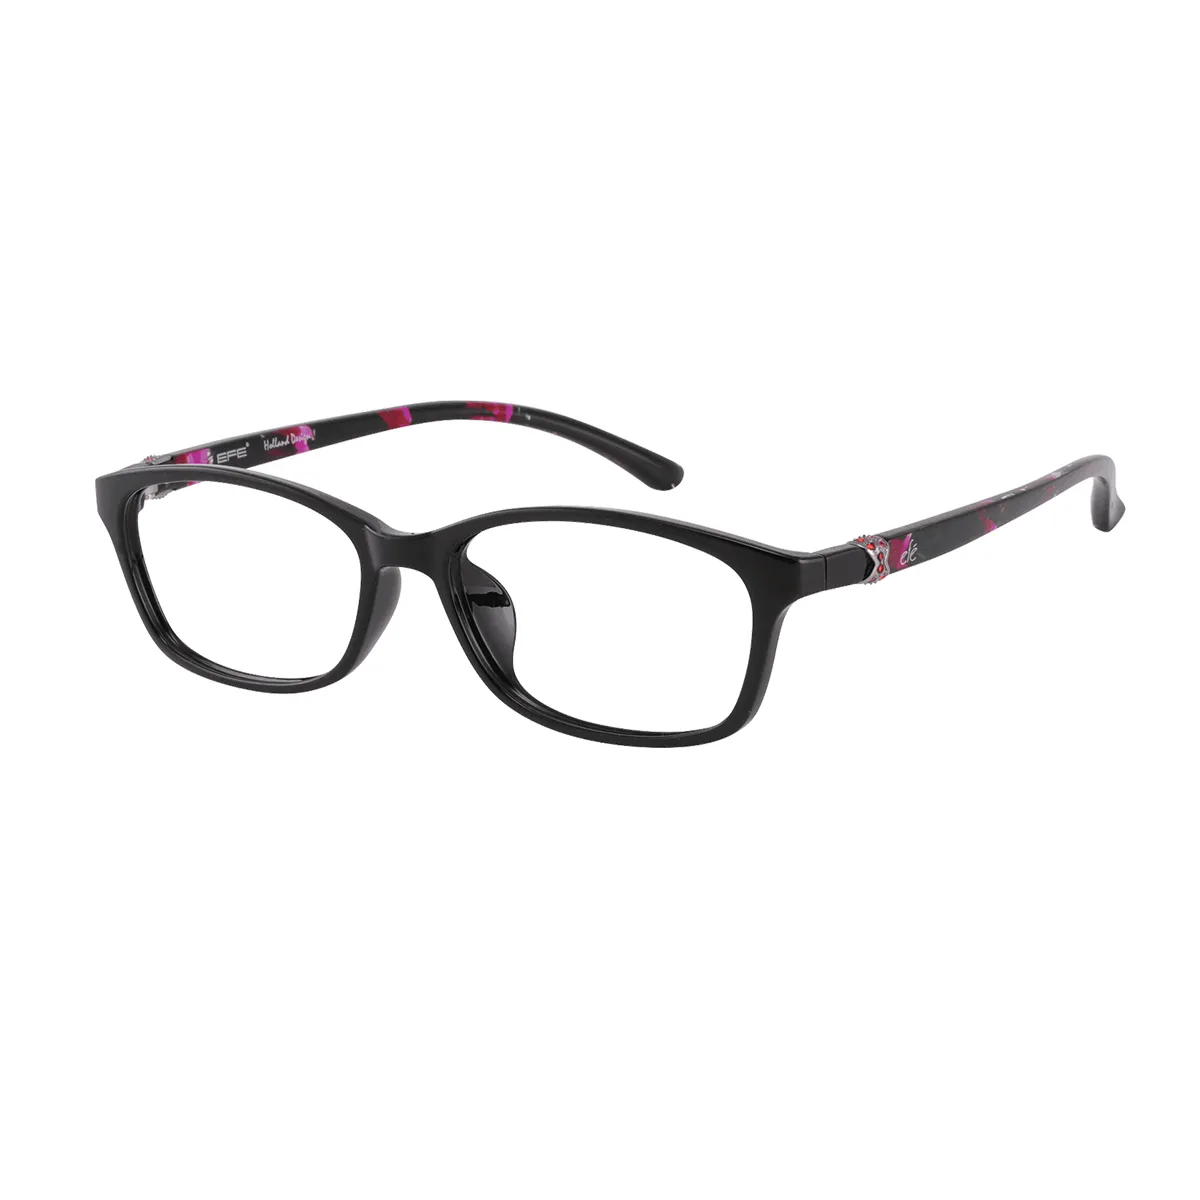 Daly - Rectangle Camouflage-pink Glasses for Women - EFE